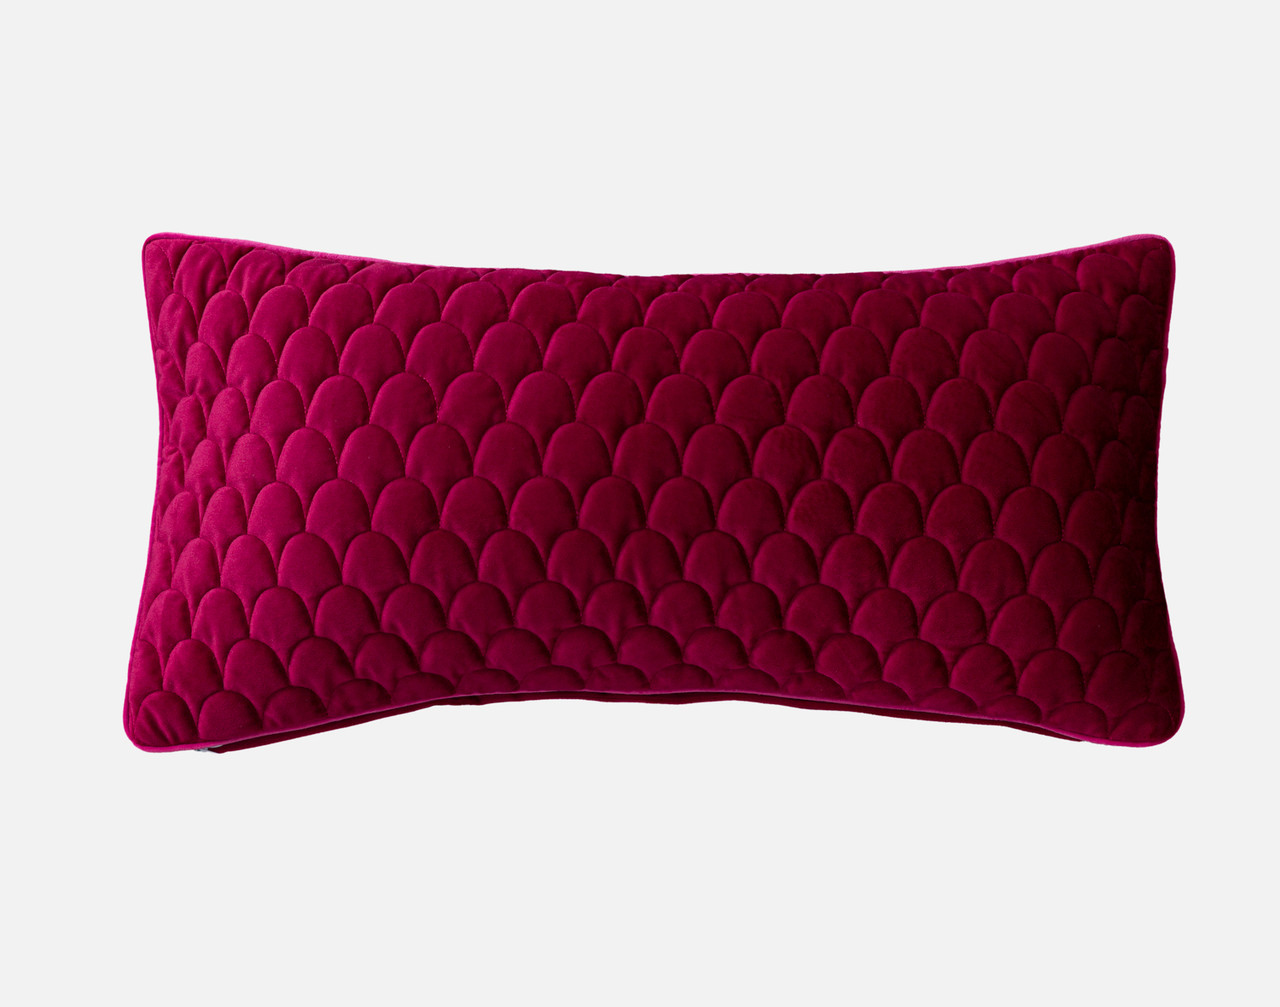 Front view of our Mambo Boudoir Pillow Cover sitting against a solid white background.